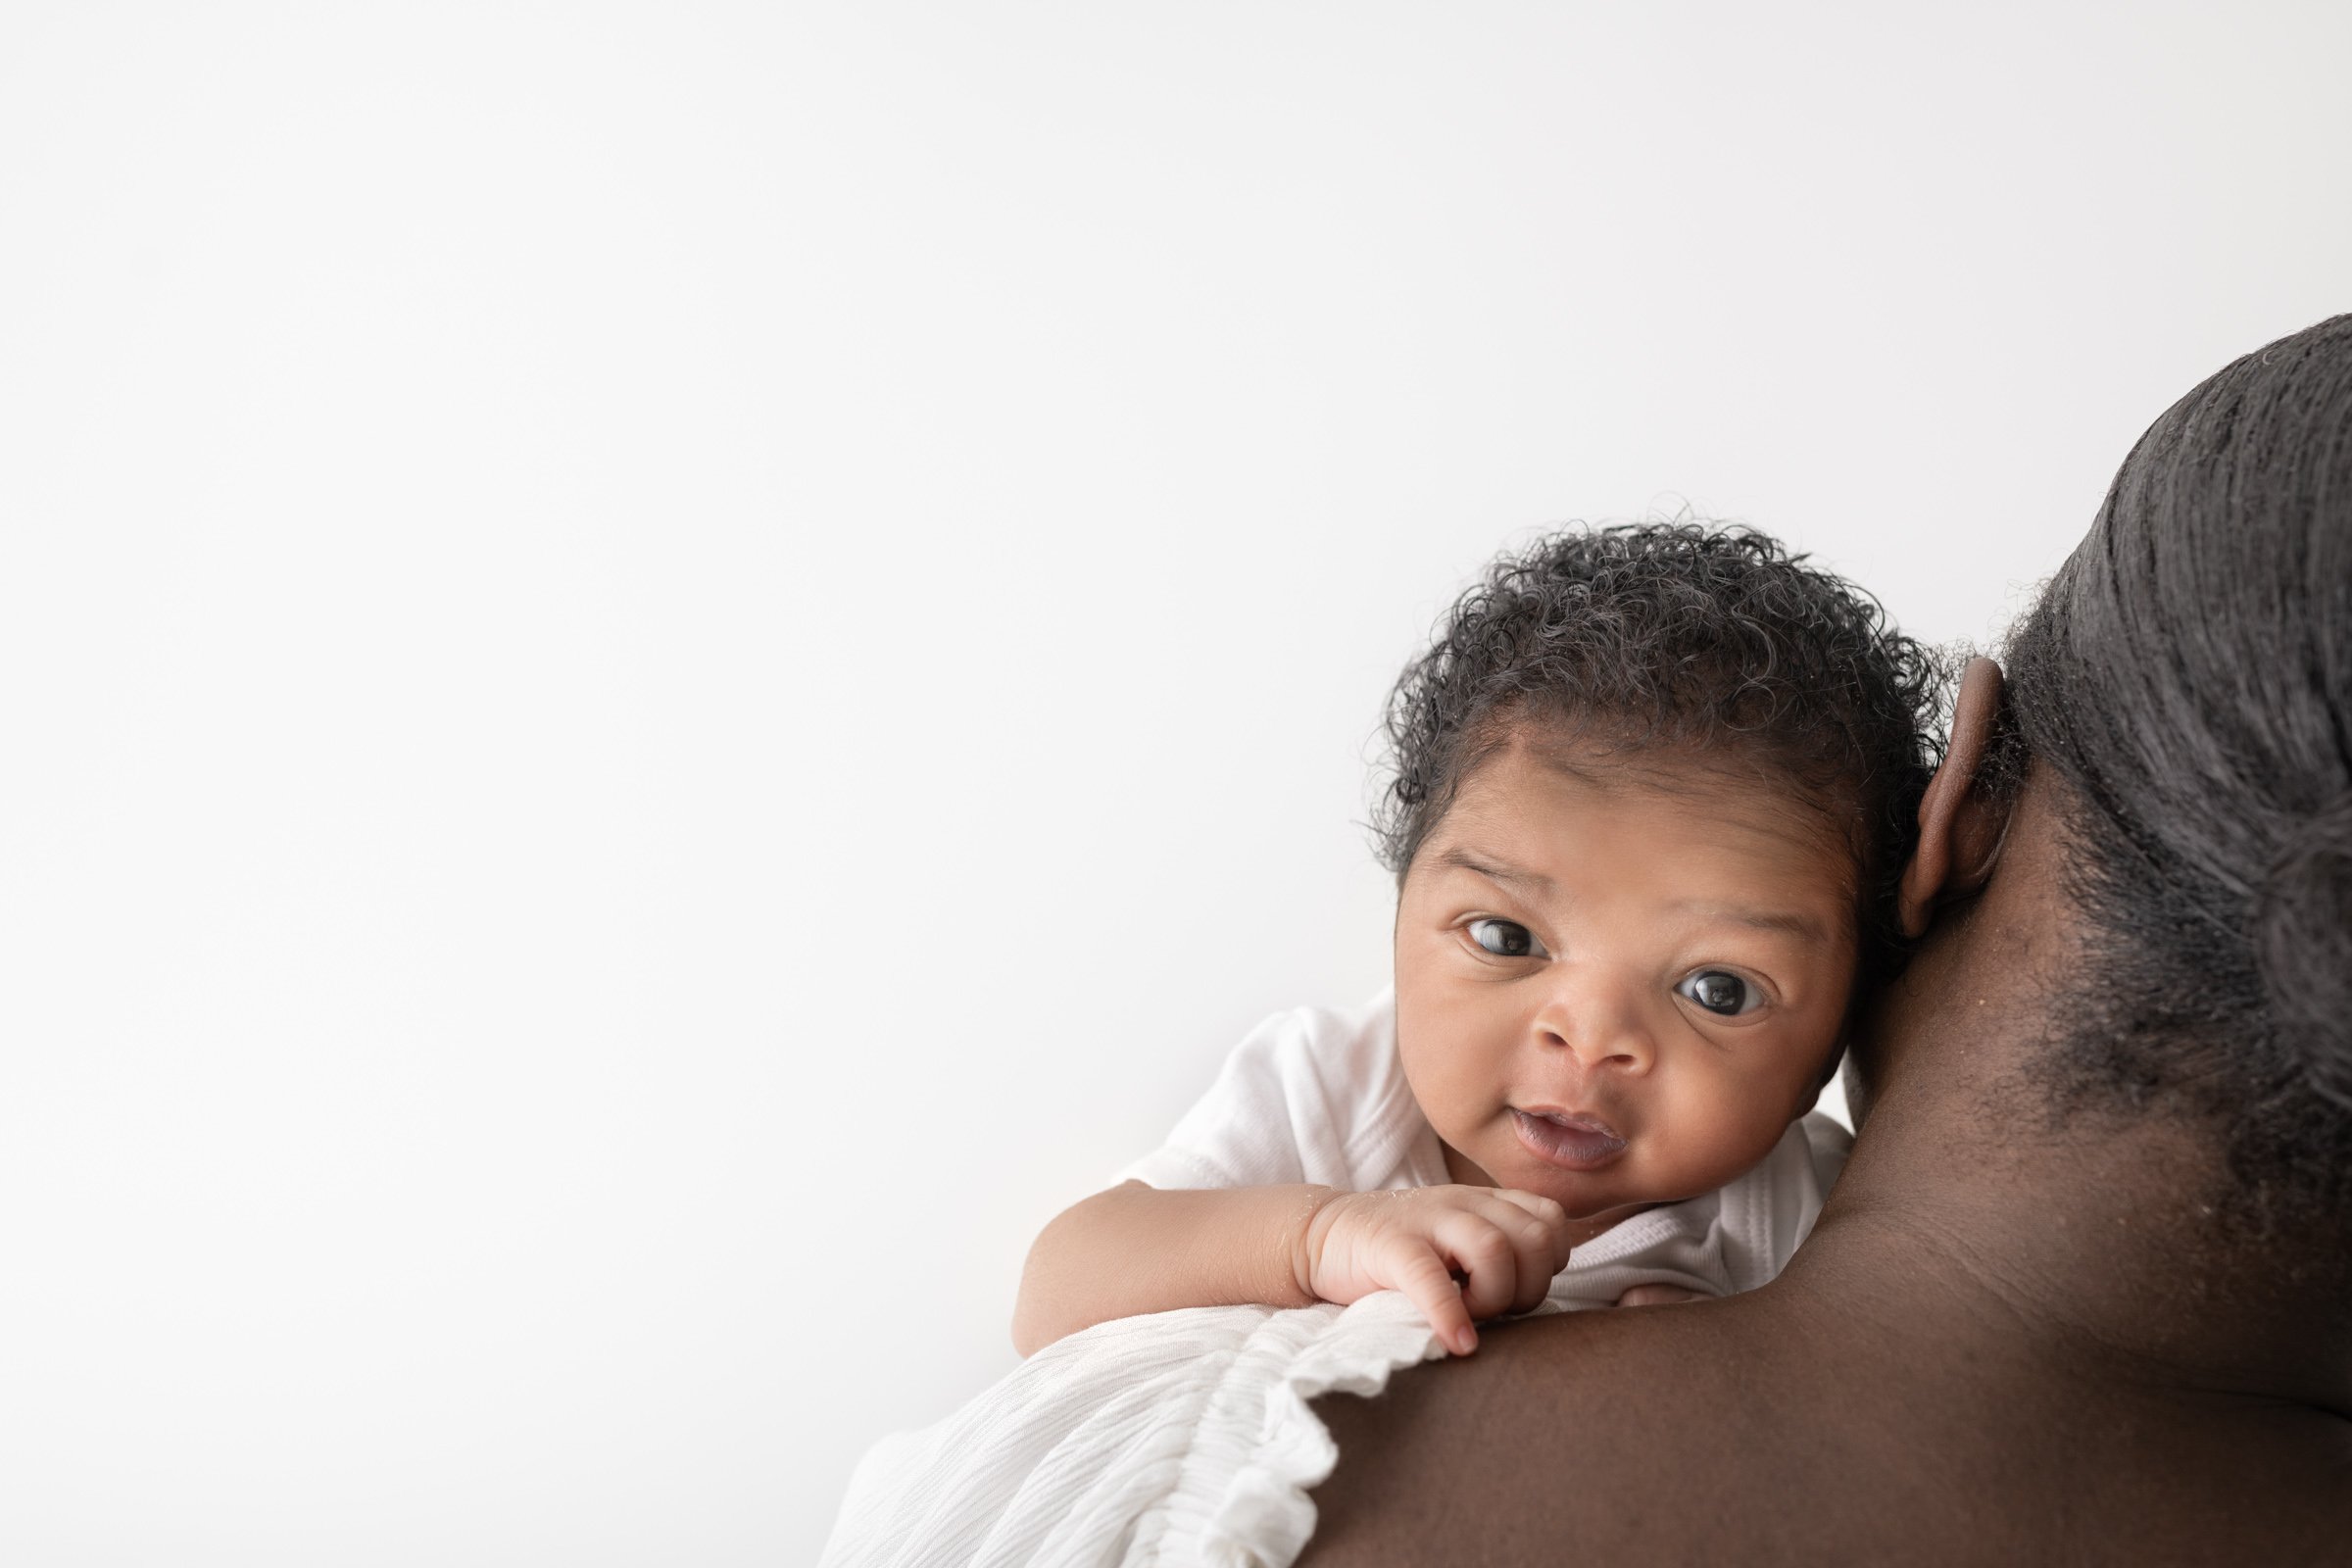  In New Jersey a newborn boy looks over his mother's shoulder captured by Nicole Hawkins Photography. over the shoulder baby portrait NJ studio #nicolehawkinsphotography #NJbabyphotography #newbornportraits #NewJerseyStudioPhotography #newbornsession